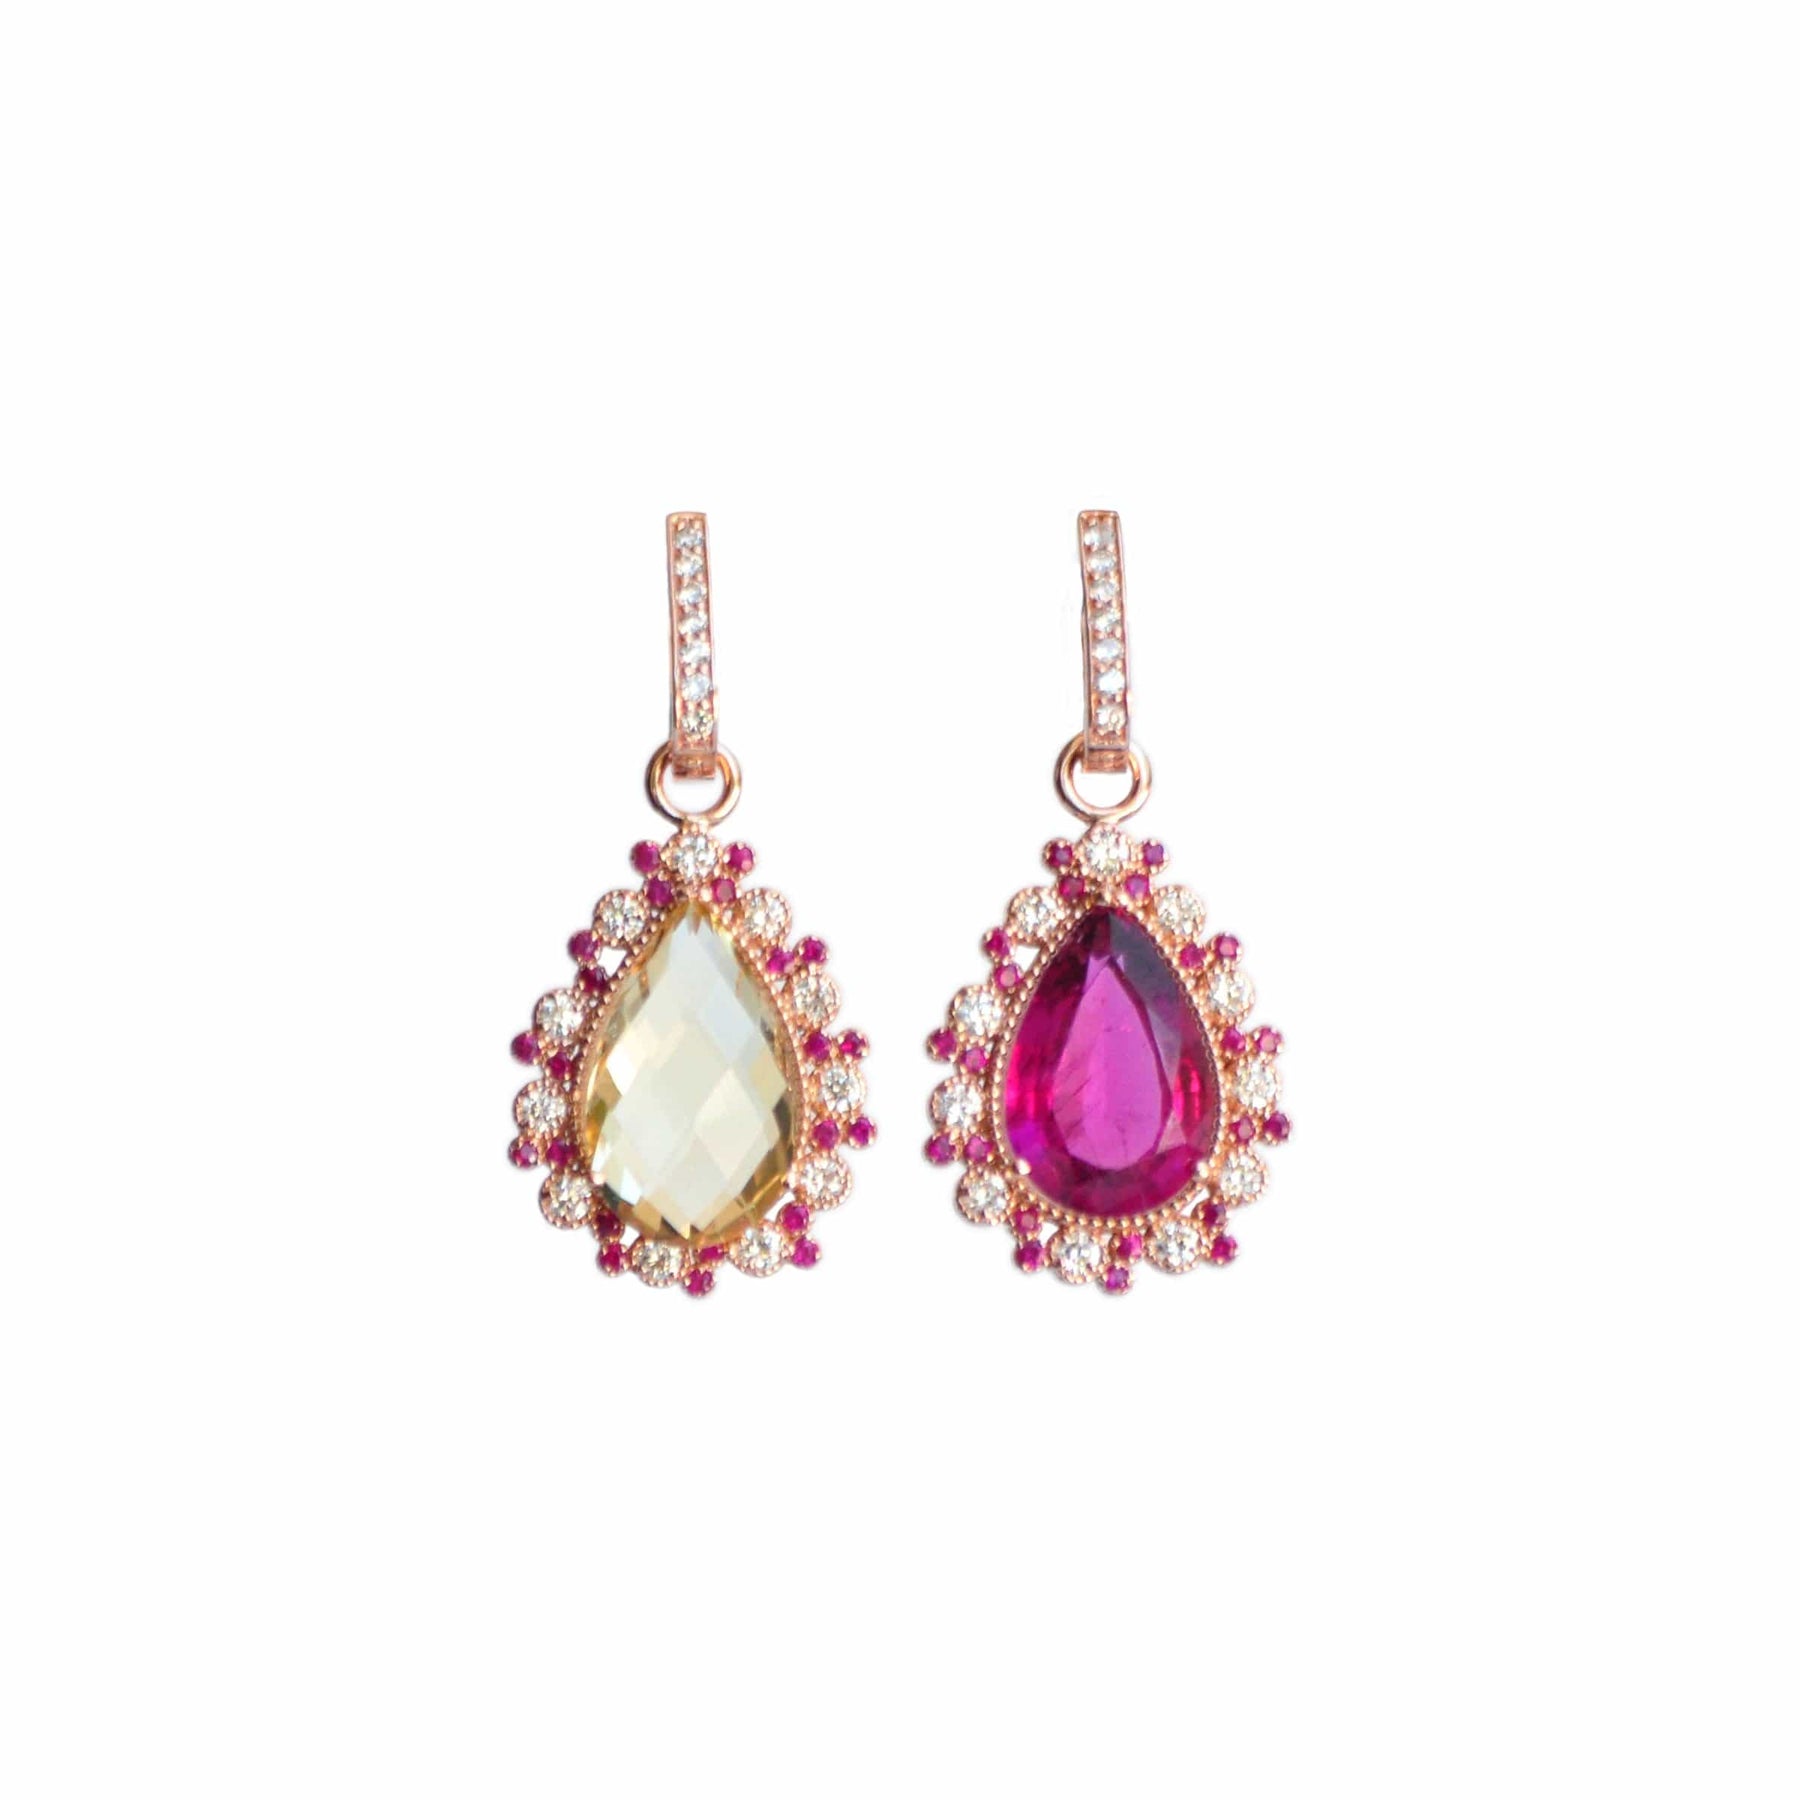 Chris Aire Gem Symphony Earrings - Chris Aire Fine Jewelry & Timepieces